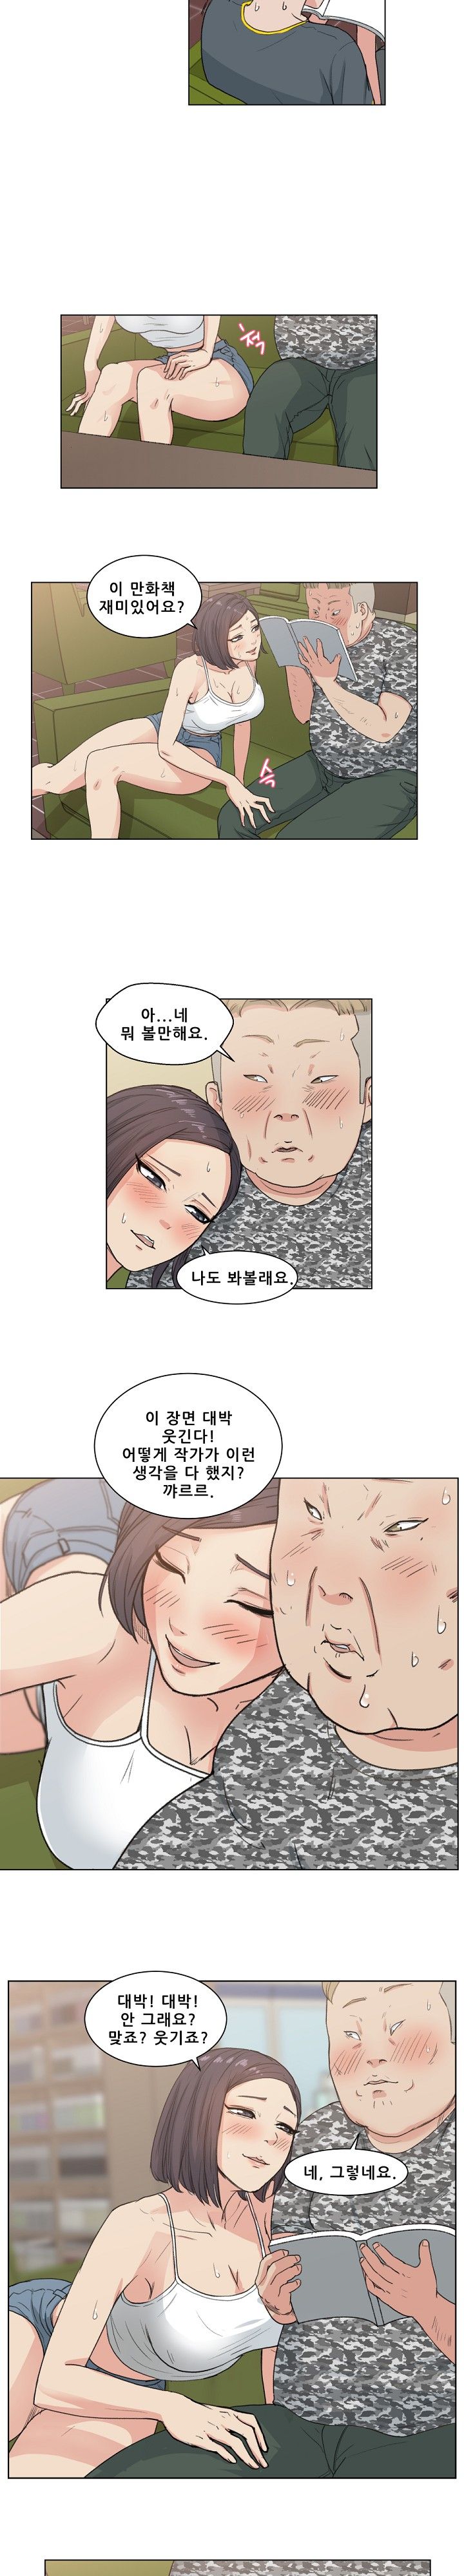 Sooyung Comic Shop Raw - Chapter 2 Page 8